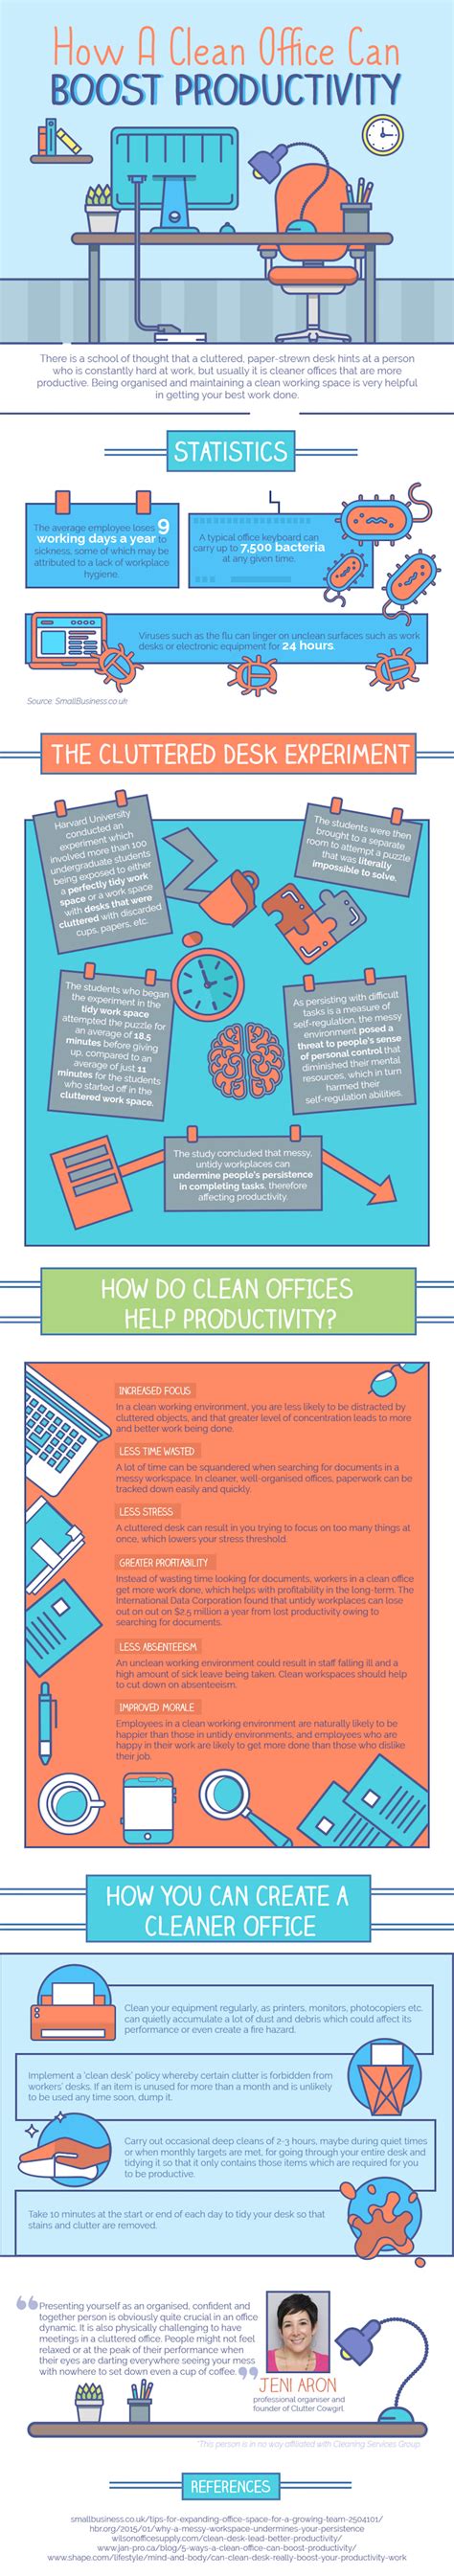 How A Clean Office Can Boost Productivity